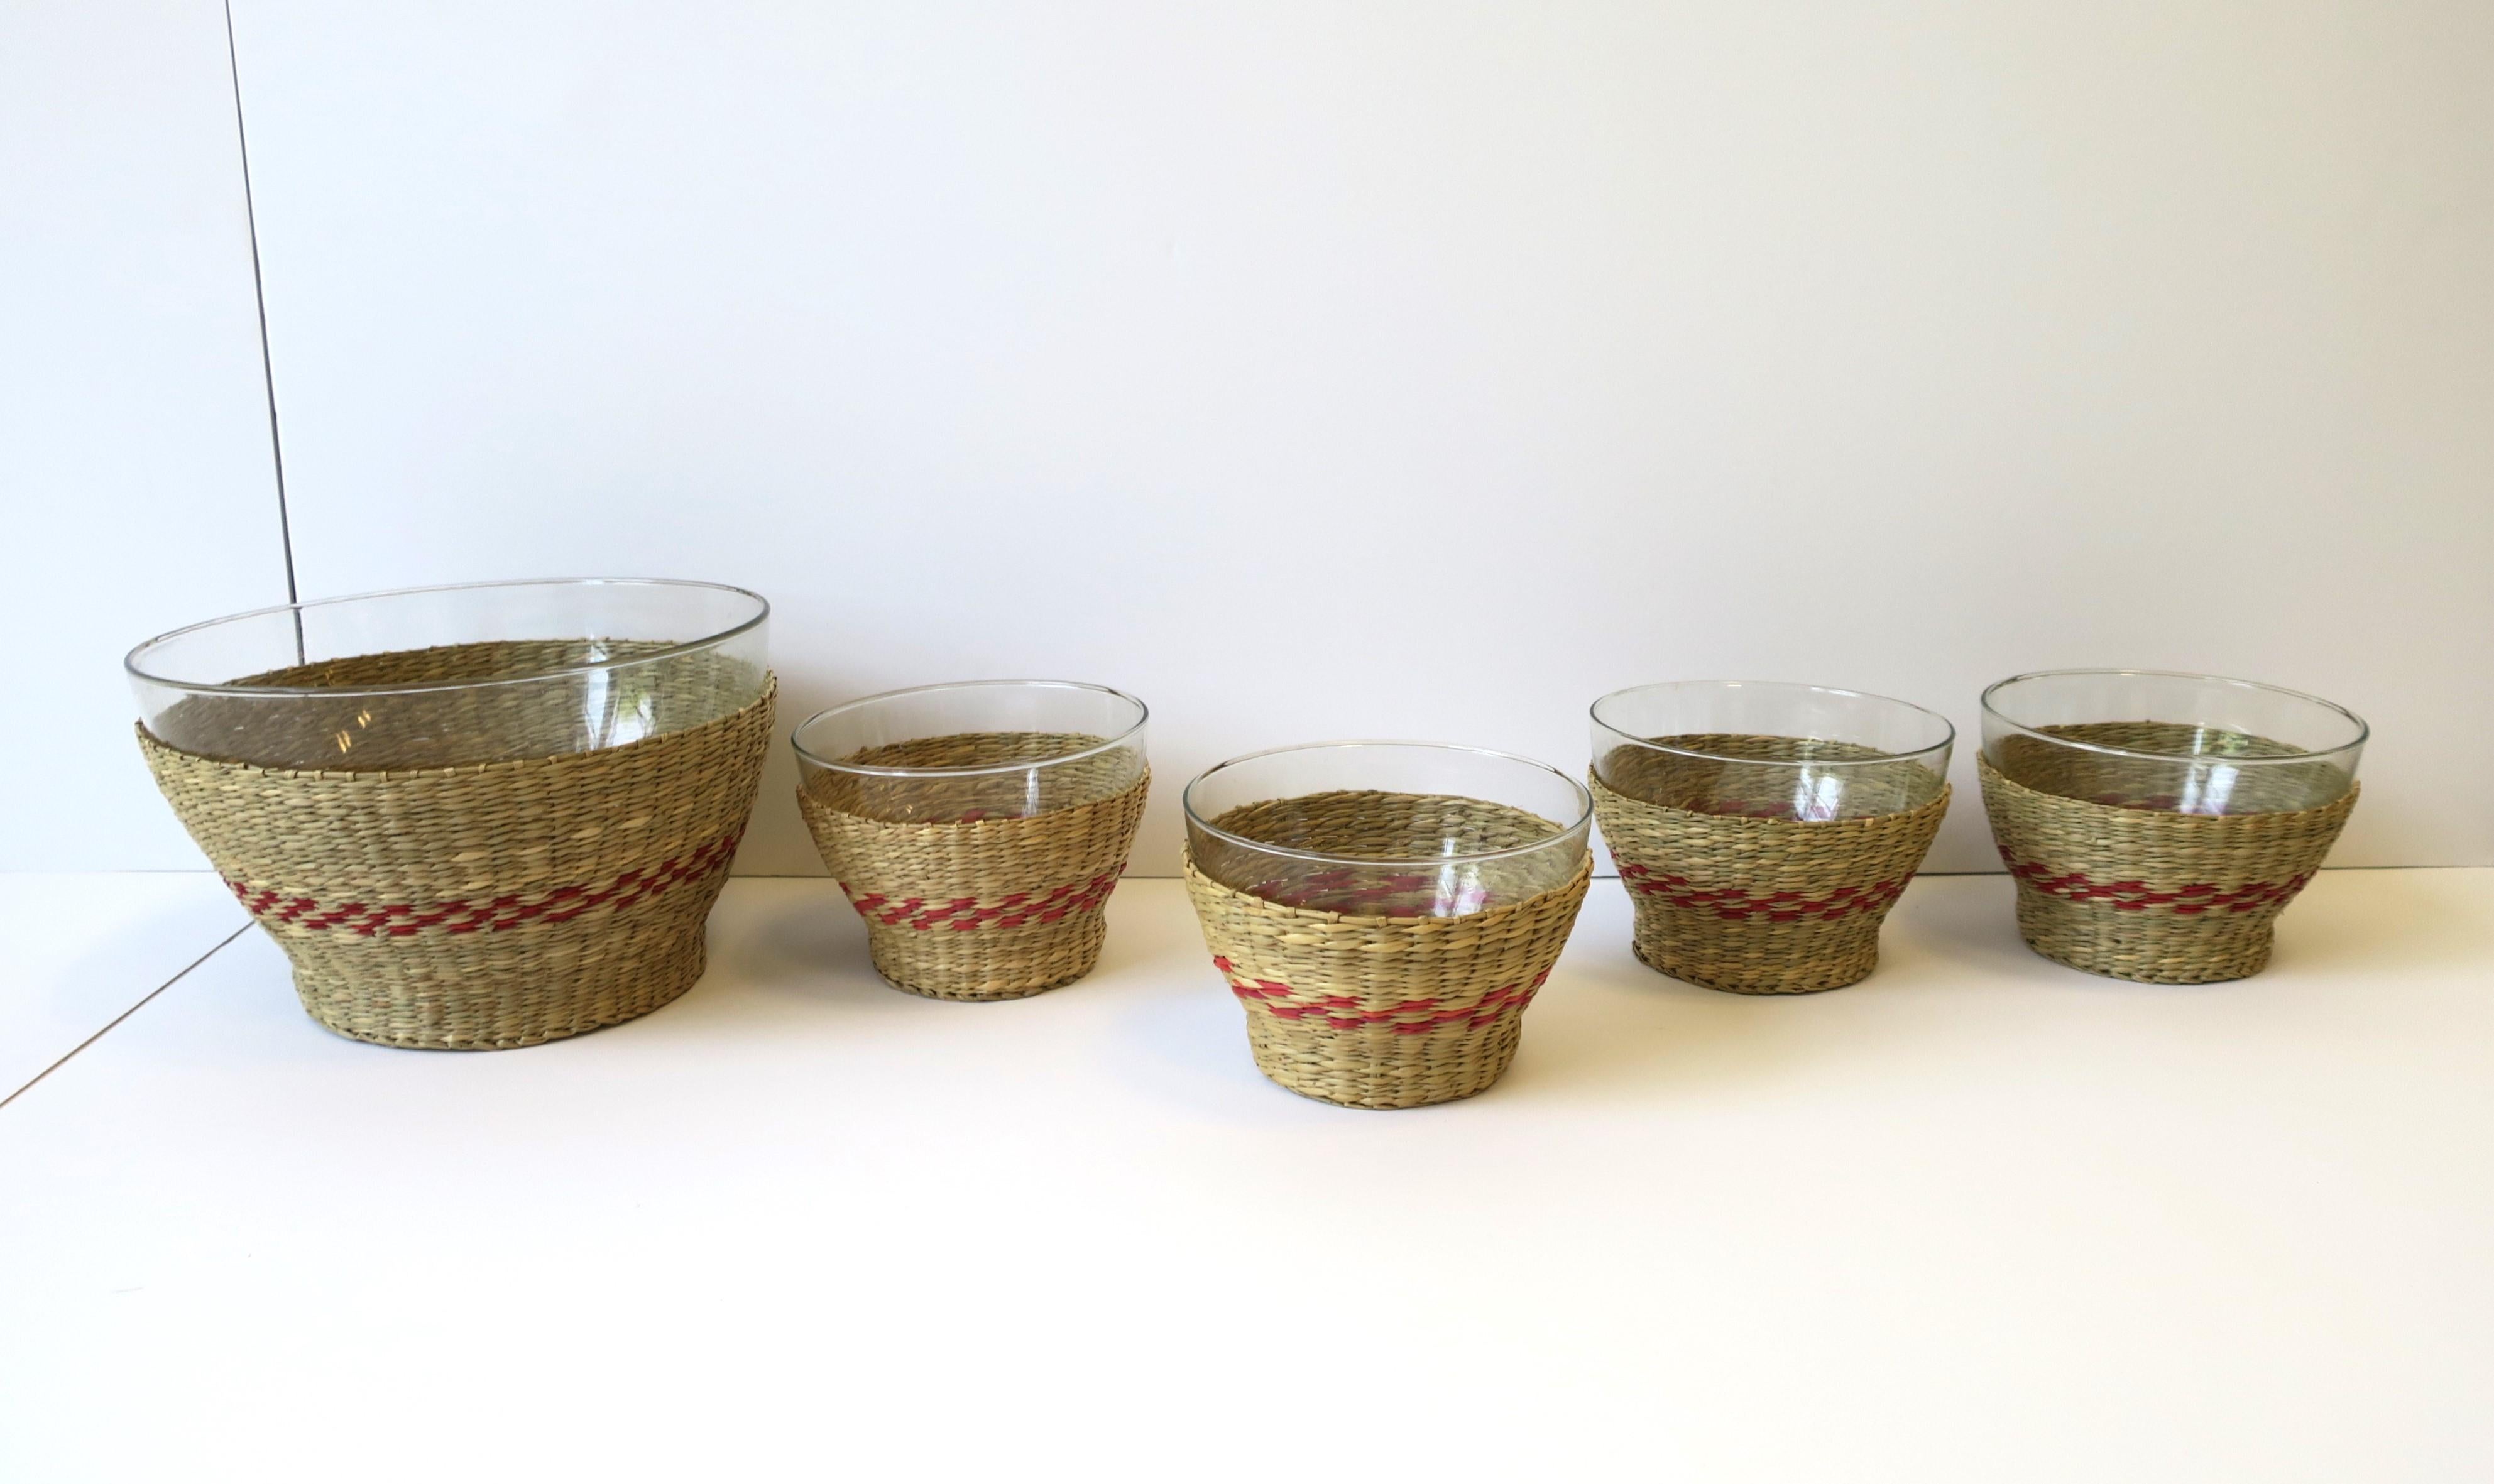 American Classical Wicker and Glass Bowls, Set of 5